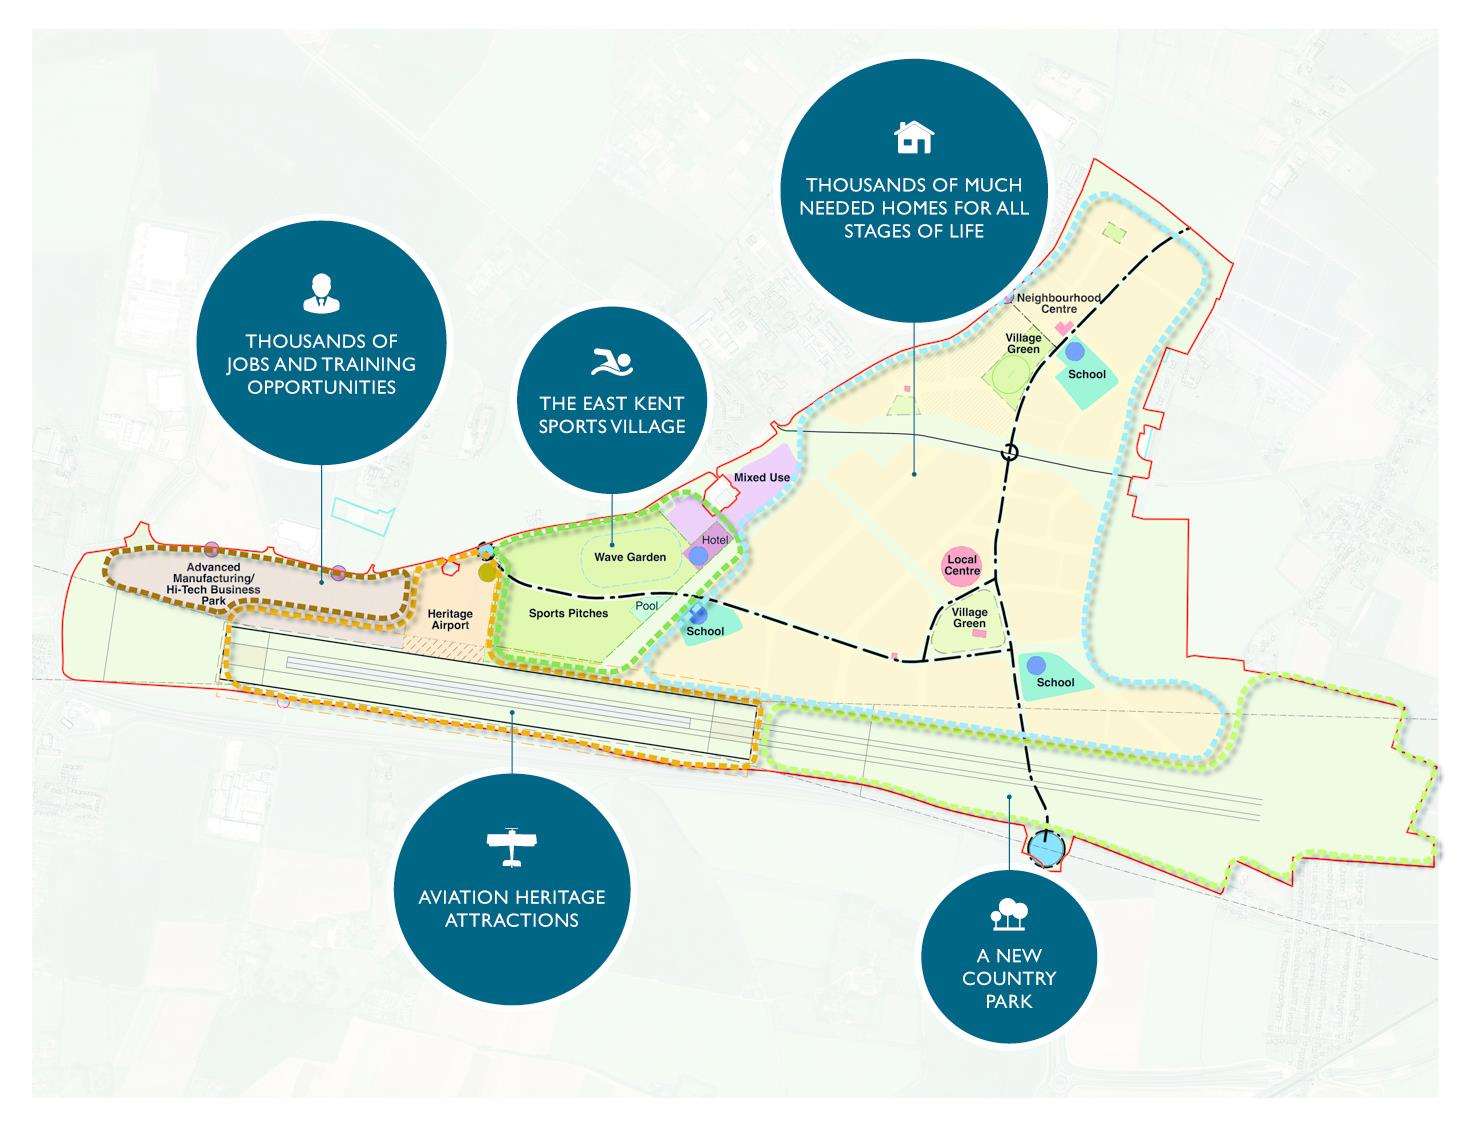 Stone Hill Park's outline plans for the former Manston Airport site